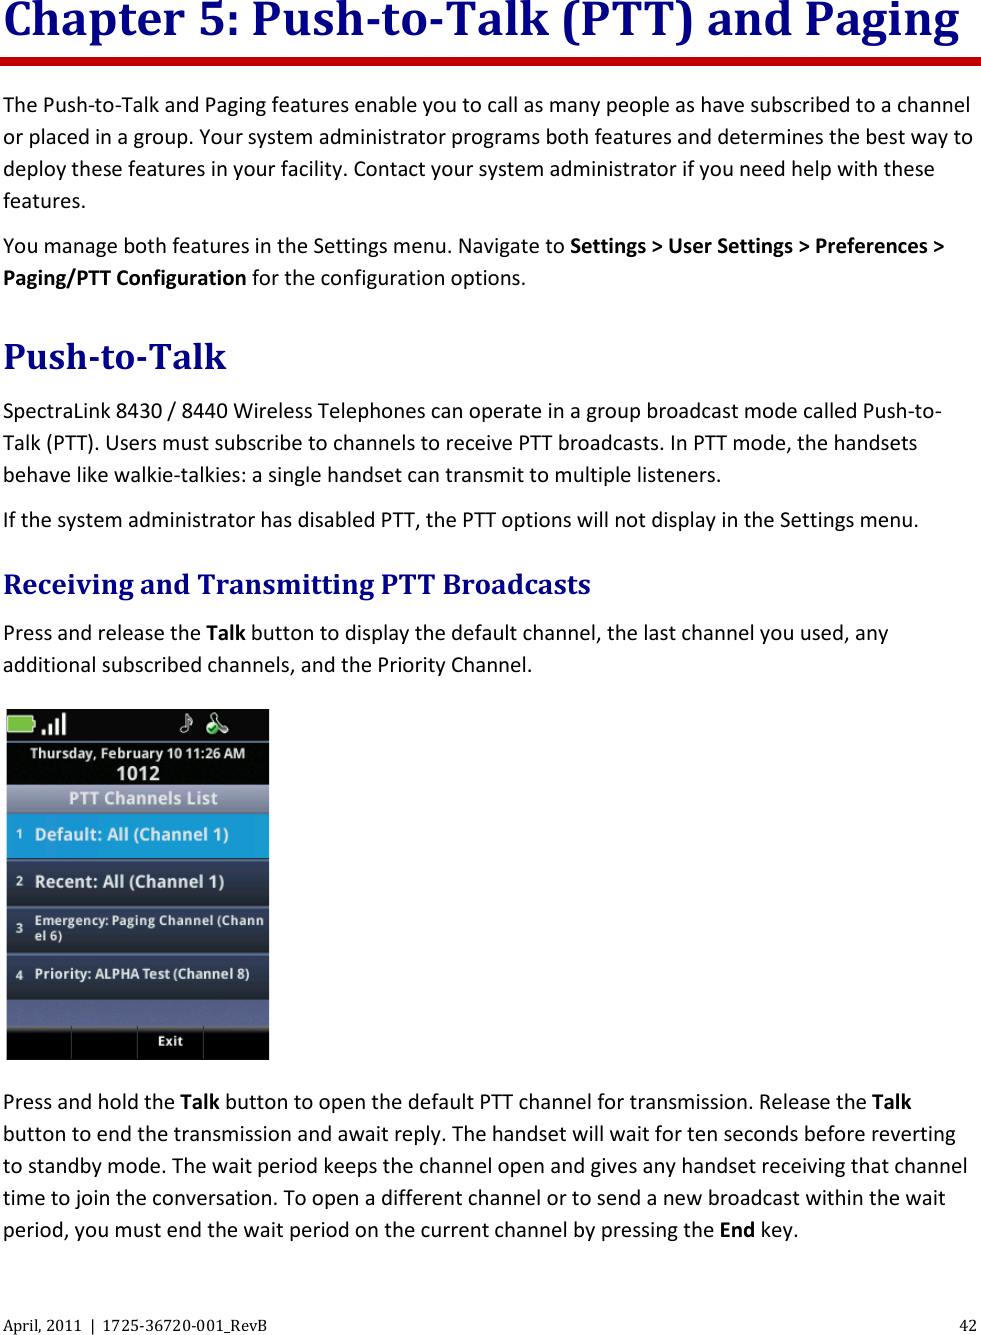  April, 2011  |  1725-36720-001_RevB 42  Chapter 5: Push-to-Talk (PTT) and Paging The Push-to-Talk and Paging features enable you to call as many people as have subscribed to a channel or placed in a group. Your system administrator programs both features and determines the best way to deploy these features in your facility. Contact your system administrator if you need help with these features. You manage both features in the Settings menu. Navigate to Settings &gt; User Settings &gt; Preferences &gt; Paging/PTT Configuration for the configuration options. Push-to-Talk SpectraLink 8430 / 8440 Wireless Telephones can operate in a group broadcast mode called Push-to-Talk (PTT). Users must subscribe to channels to receive PTT broadcasts. In PTT mode, the handsets behave like walkie-talkies: a single handset can transmit to multiple listeners.  If the system administrator has disabled PTT, the PTT options will not display in the Settings menu. Receiving and Transmitting PTT Broadcasts Press and release the Talk button to display the default channel, the last channel you used, any additional subscribed channels, and the Priority Channel.  Press and hold the Talk button to open the default PTT channel for transmission. Release the Talk button to end the transmission and await reply. The handset will wait for ten seconds before reverting to standby mode. The wait period keeps the channel open and gives any handset receiving that channel time to join the conversation. To open a different channel or to send a new broadcast within the wait period, you must end the wait period on the current channel by pressing the End key. 